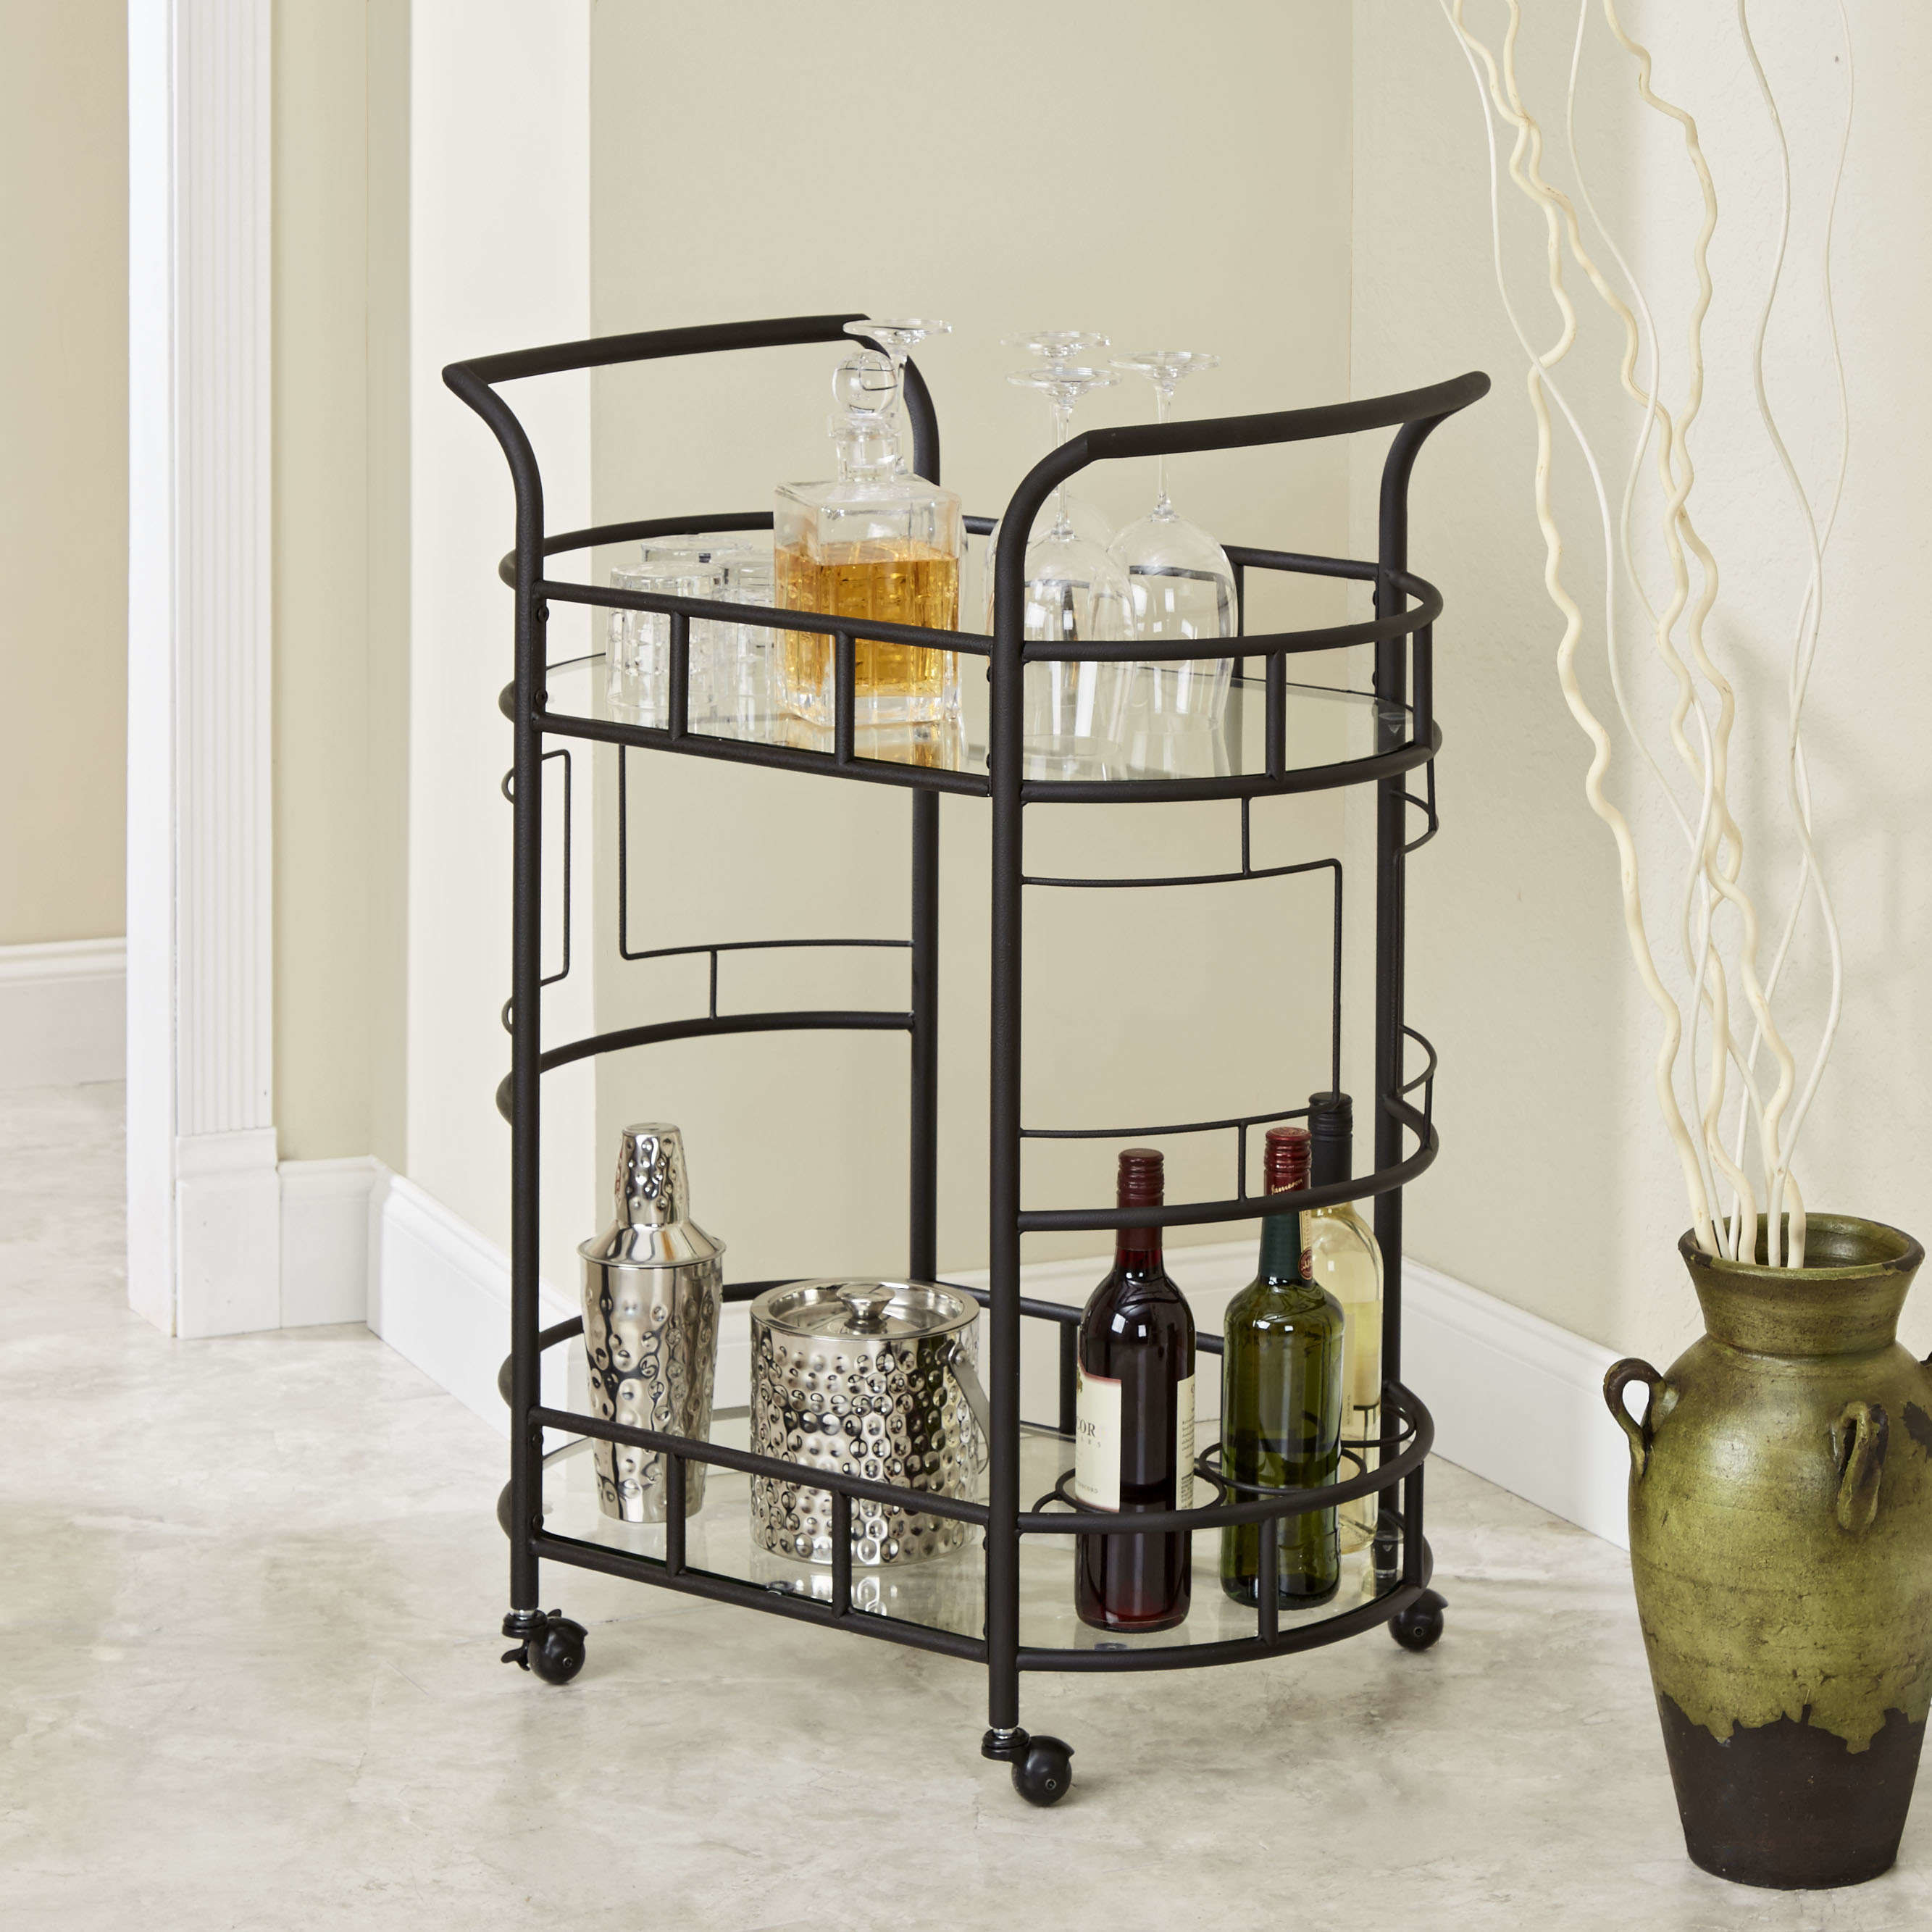 Bar cart filled with bottles, accessories and glasses.